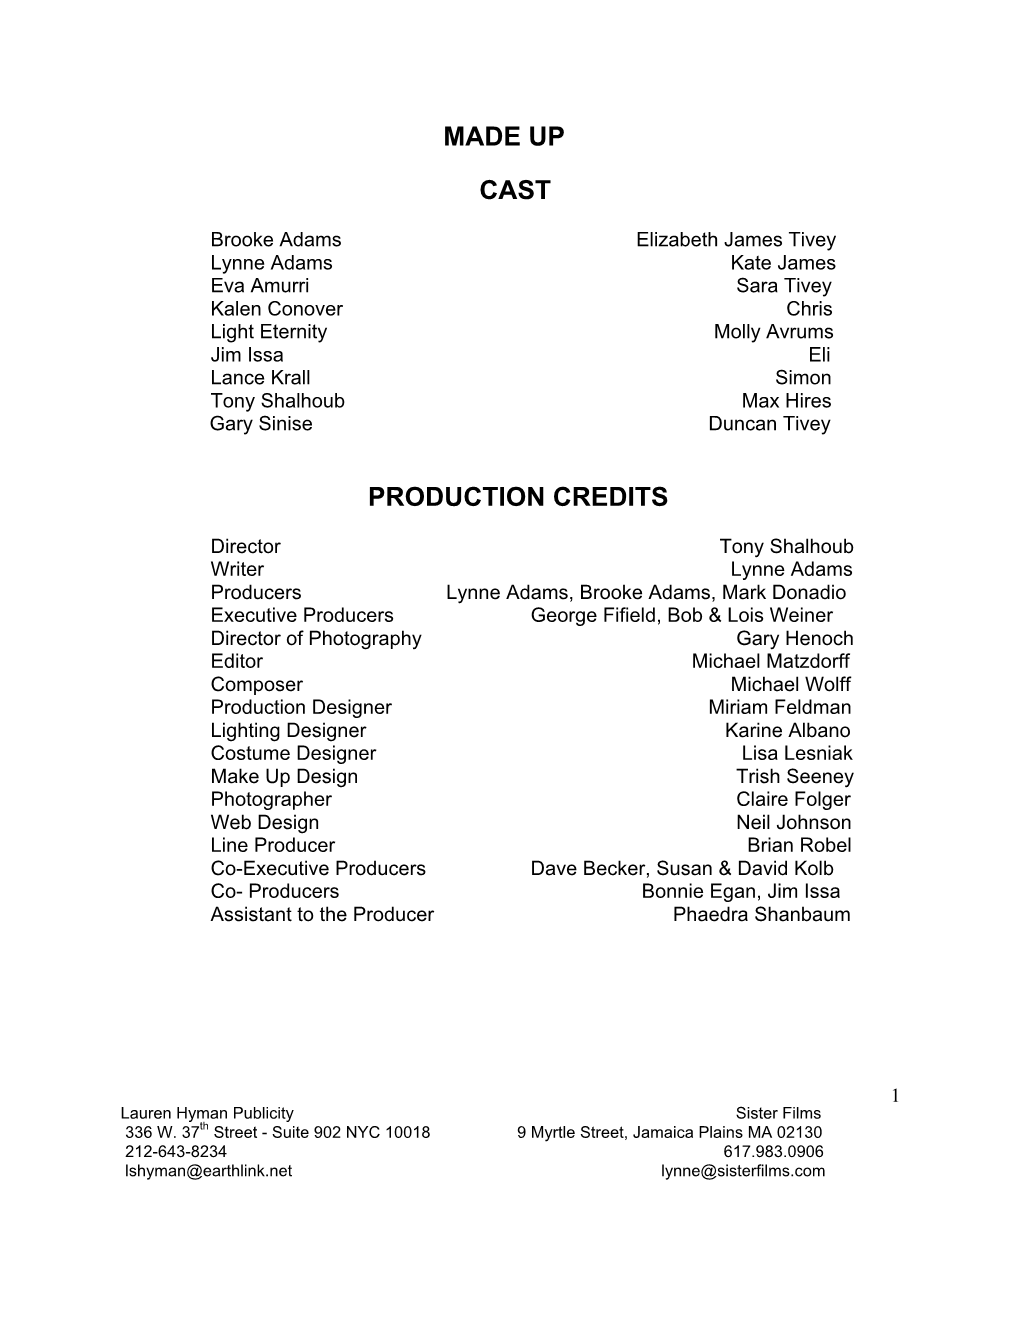 Made up Cast Production Credits